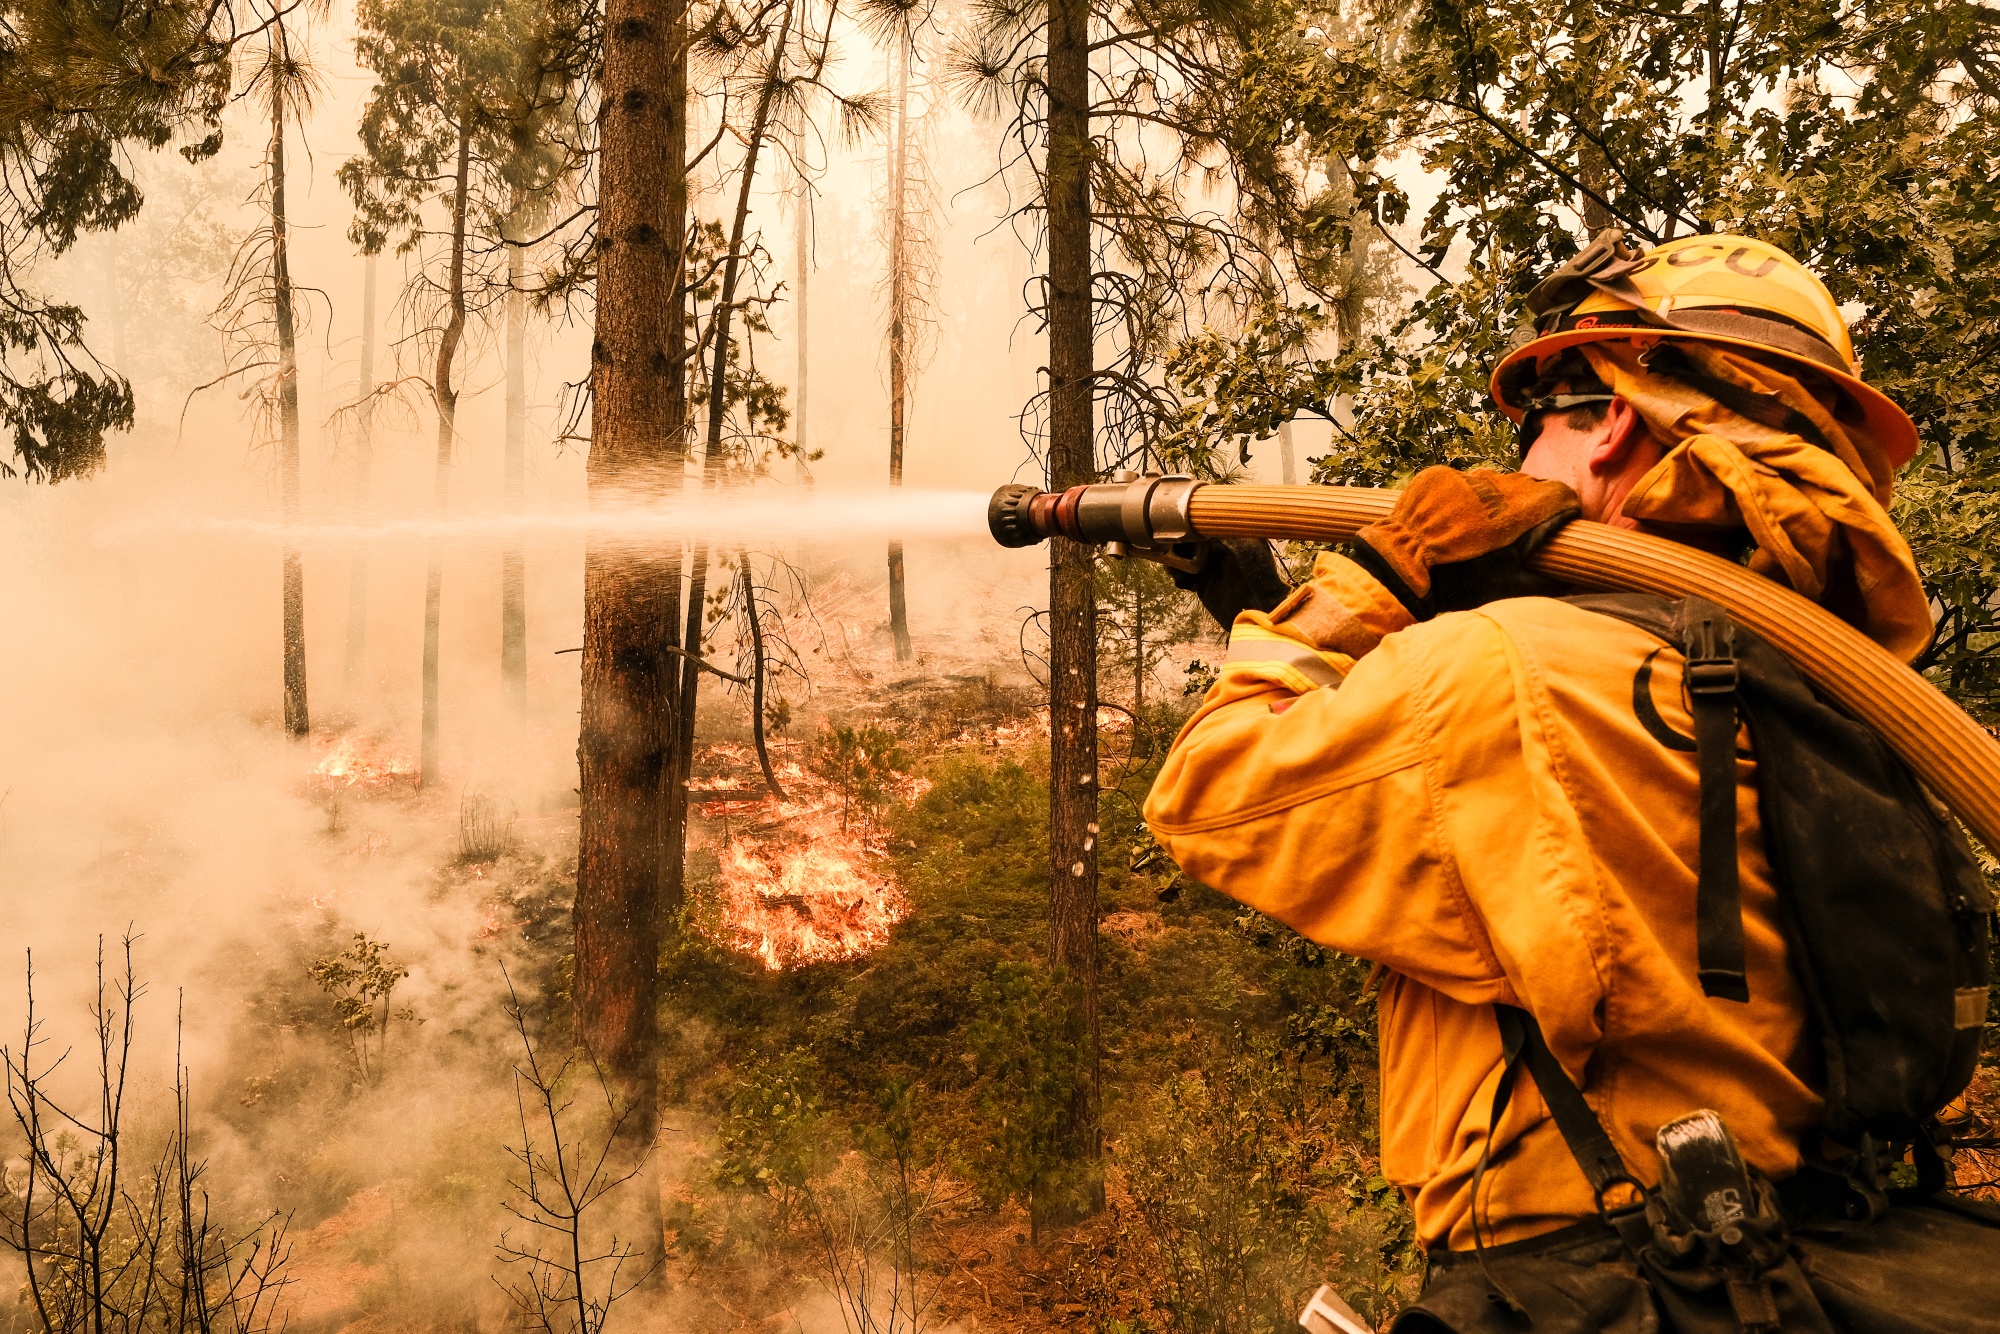 A firefighter works to control a backfire operation conducted to slow the advancement on a hillside during the Oak Fire in Mariposa County, California, on Sunday.